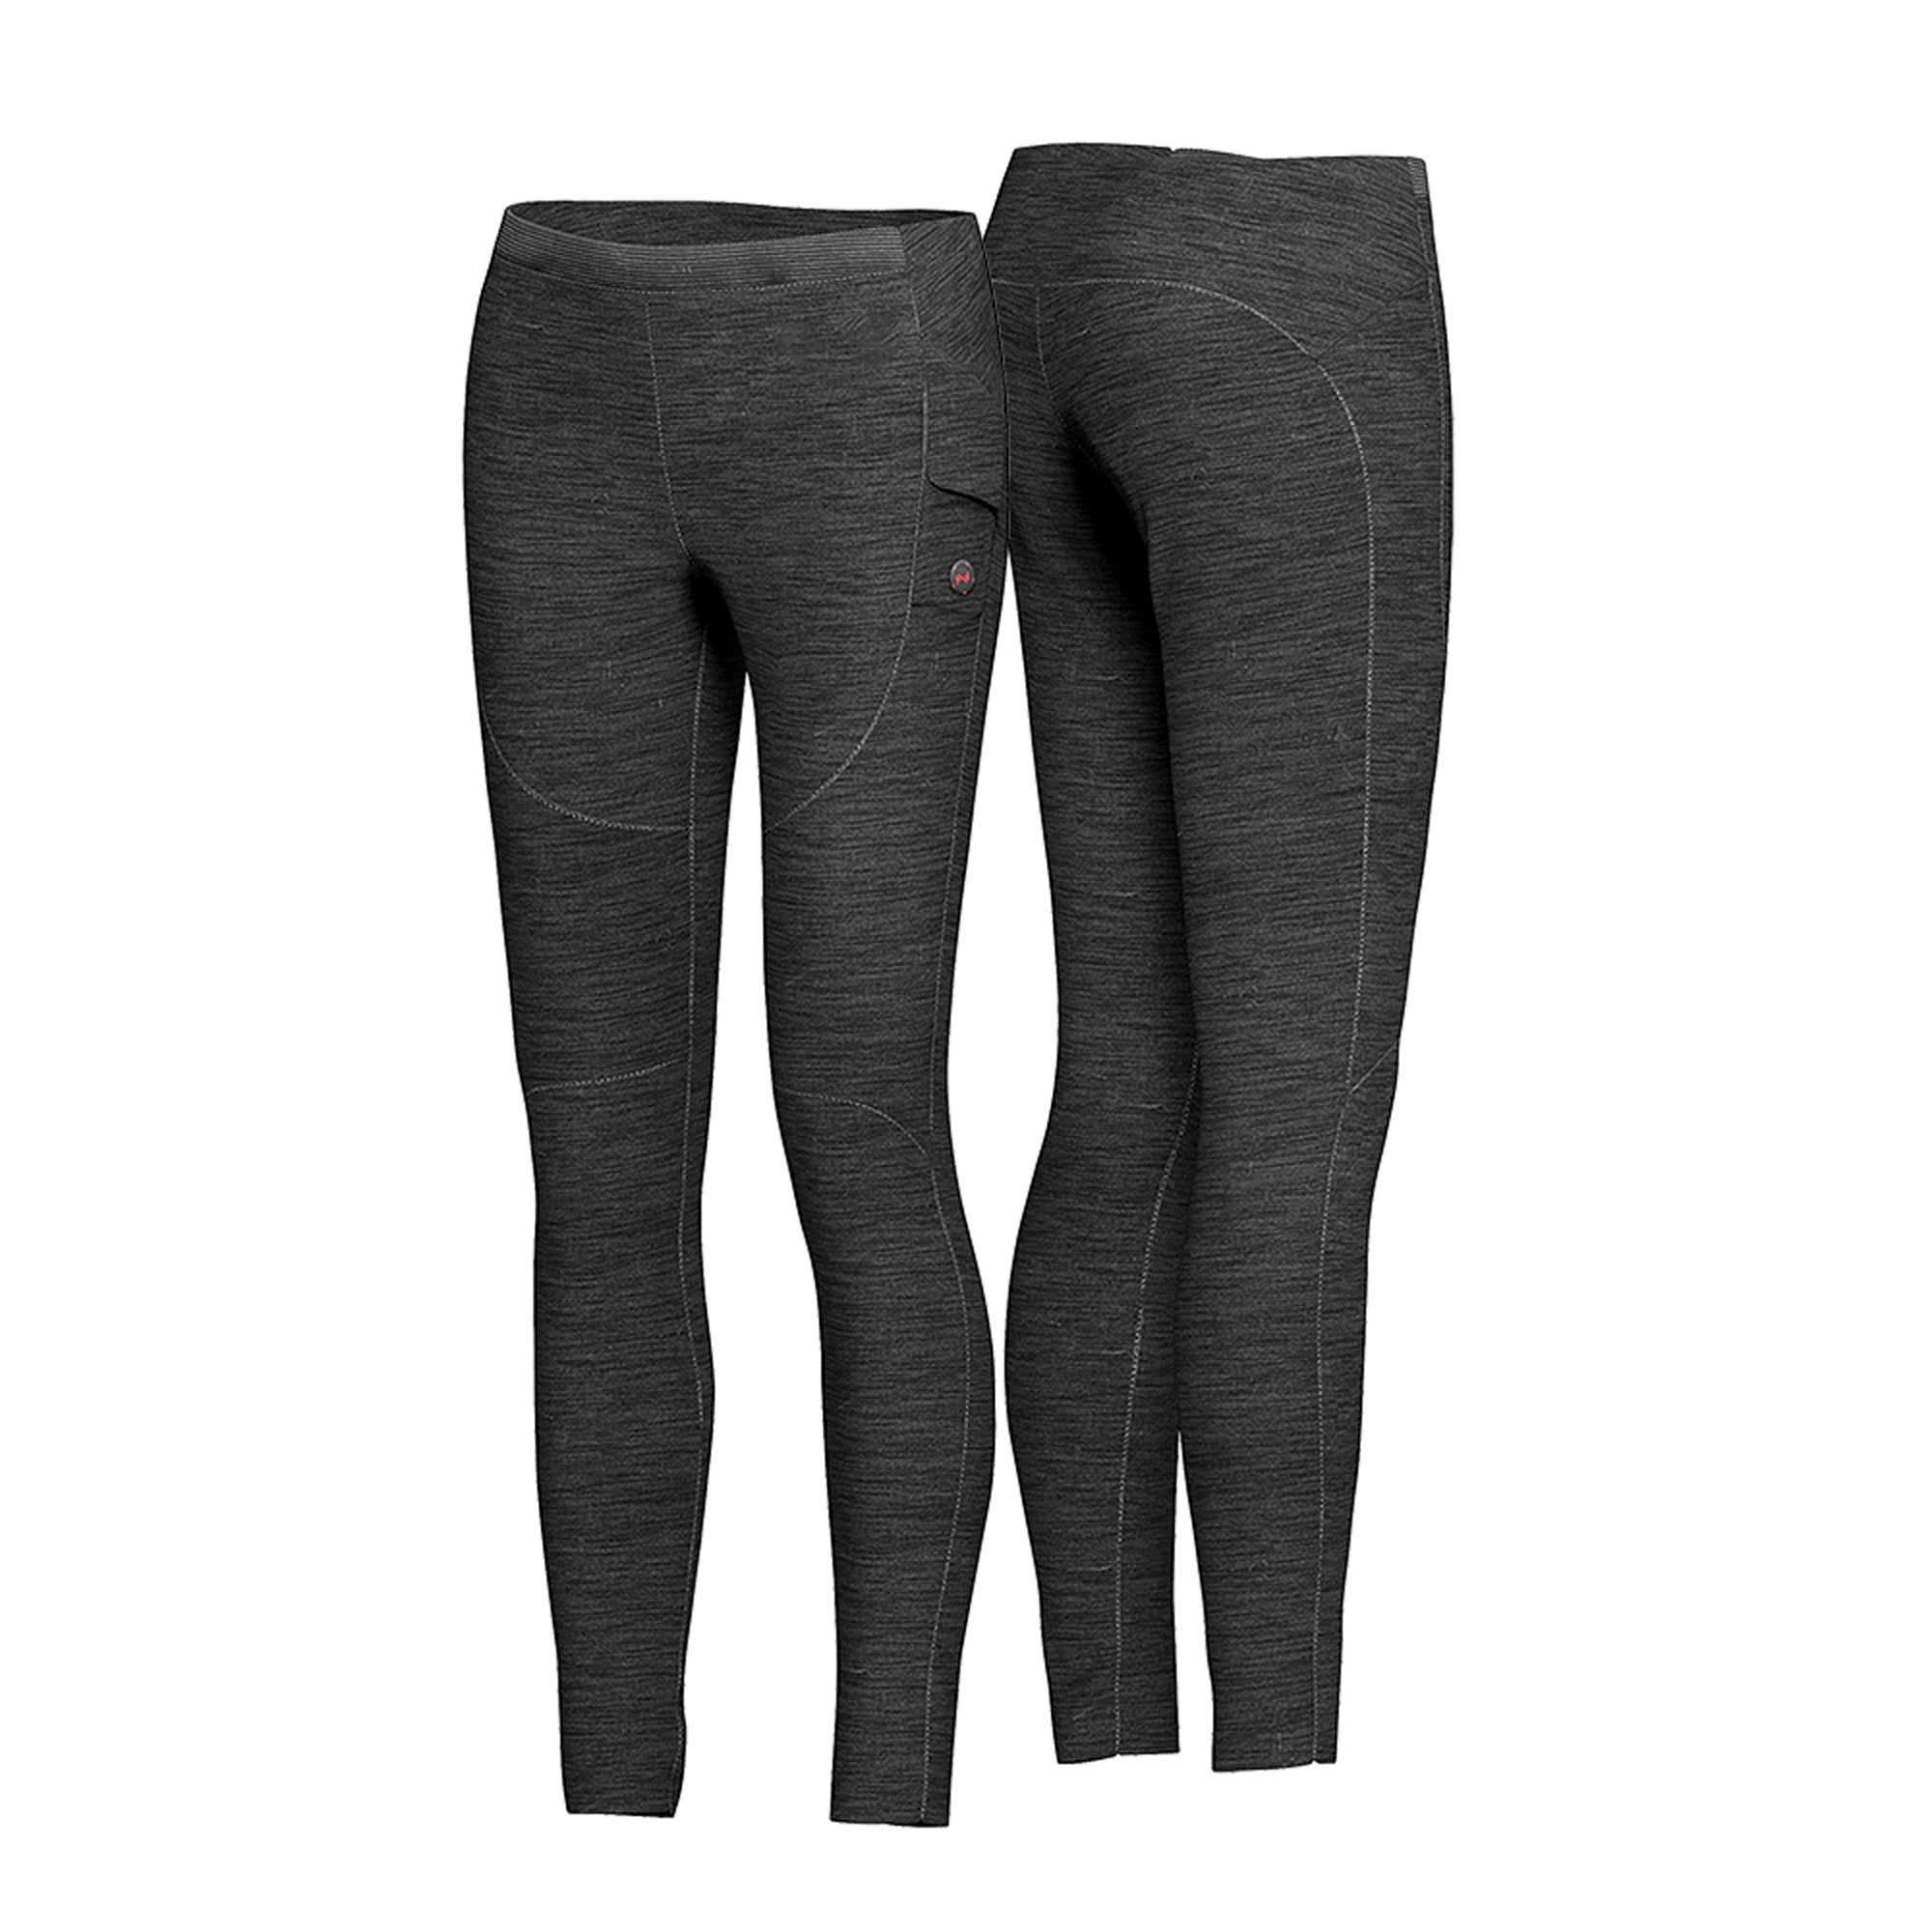 Women's Cable Fleece Lined Tights - A New Day™ Black S/M